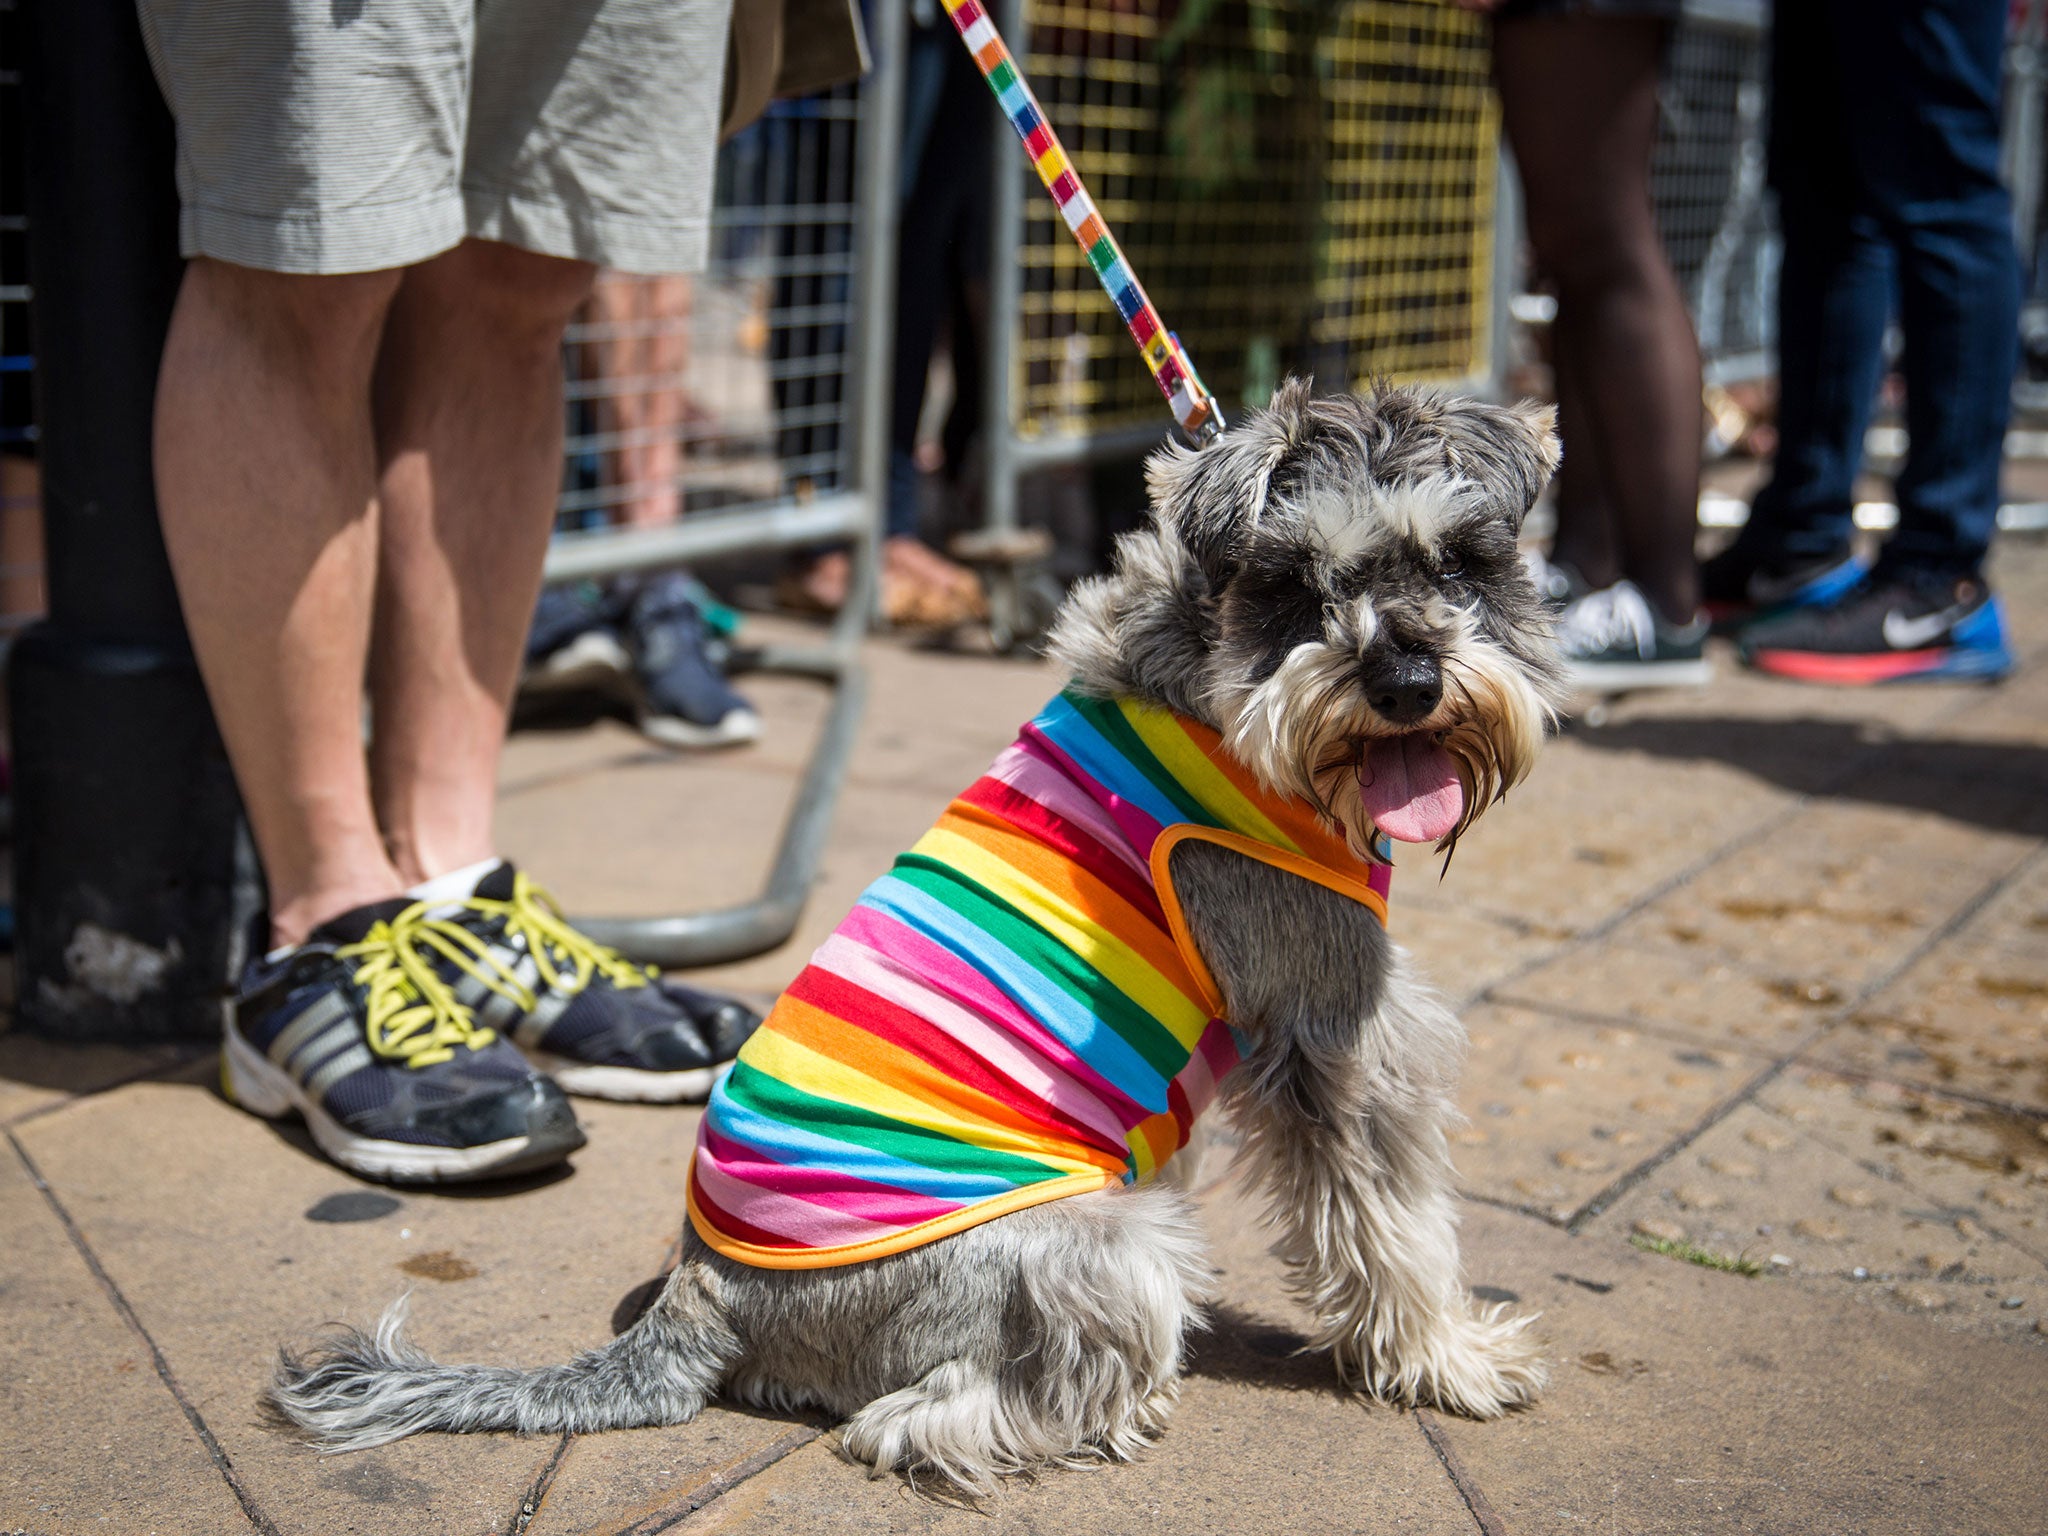 A dog is dressed in a rainbow coat